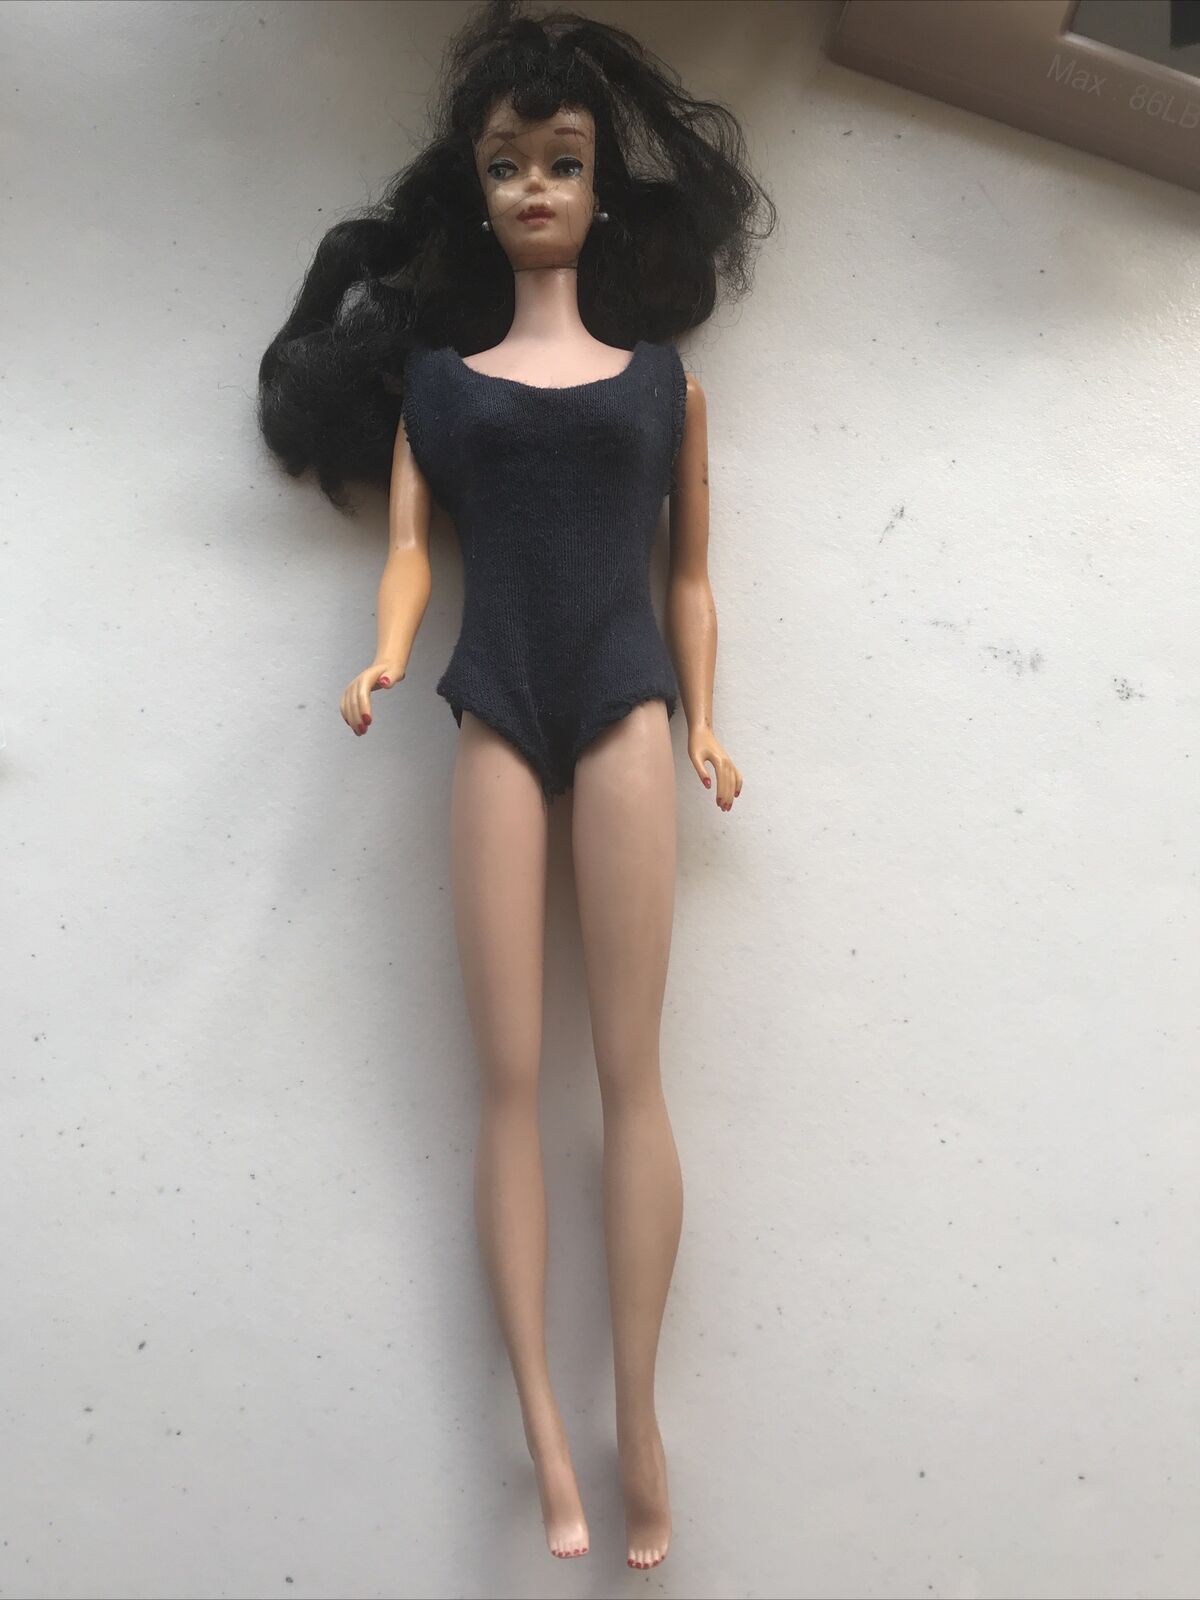 1958 Vintage MATTEL Long Hair Brunette Barbie Doll Pats Pend MCMLVIII With Flaws